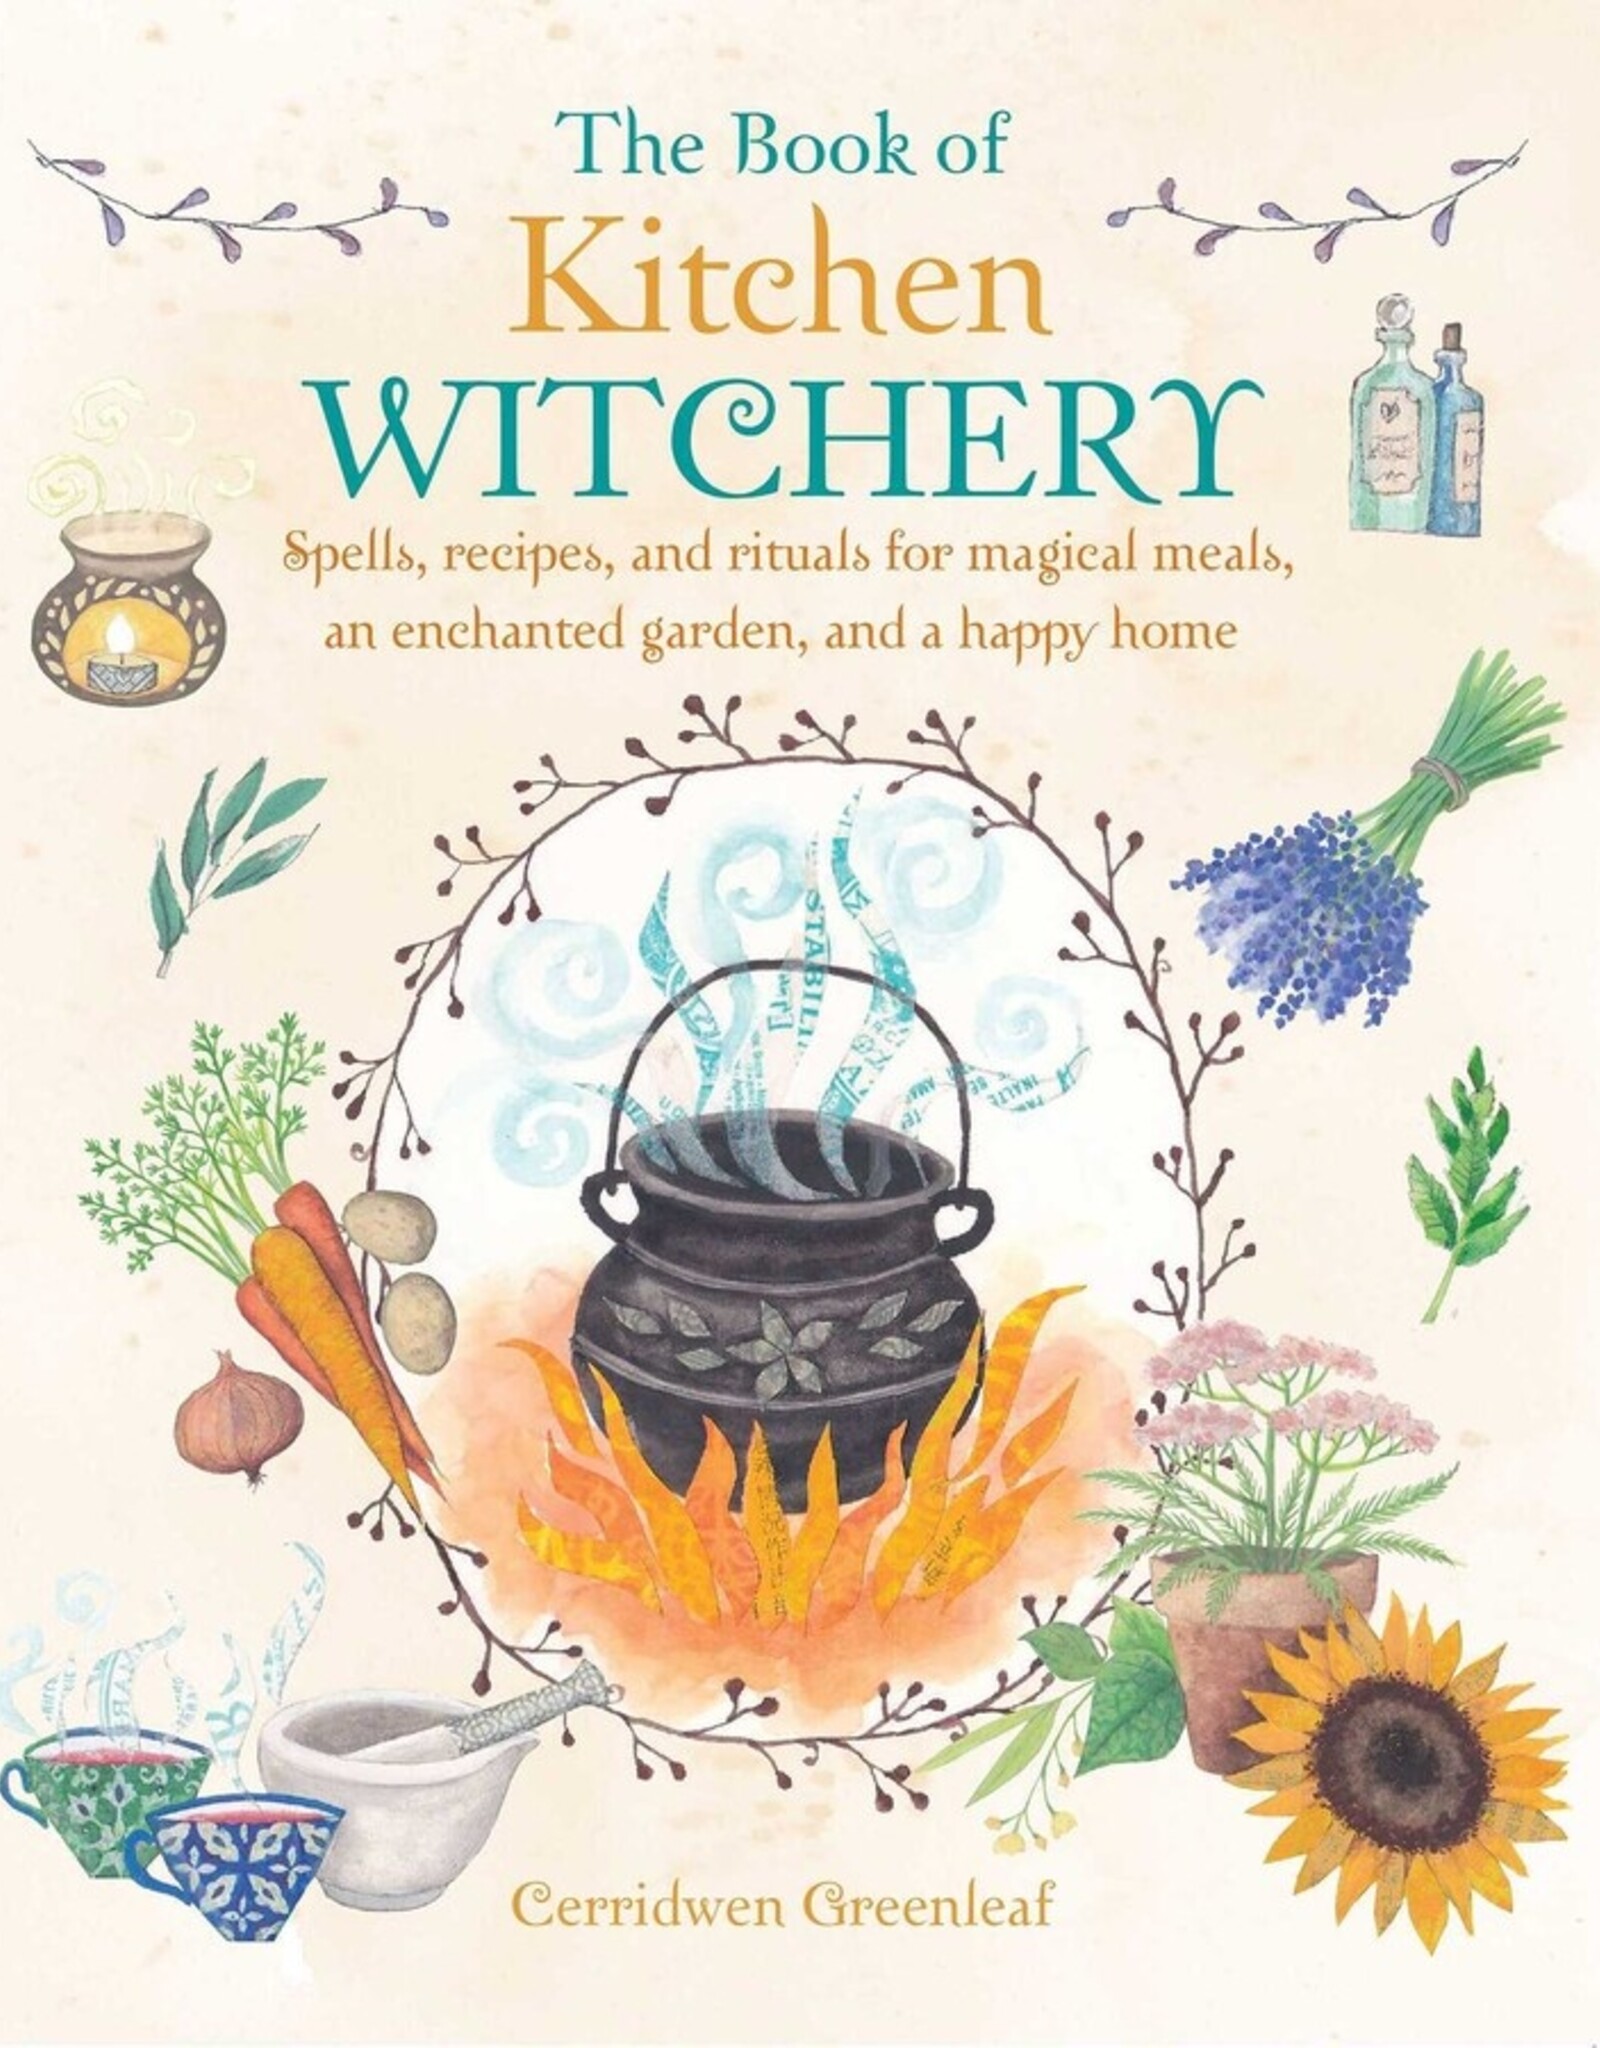 Simon & Schuster Book of Kitchen Witchery